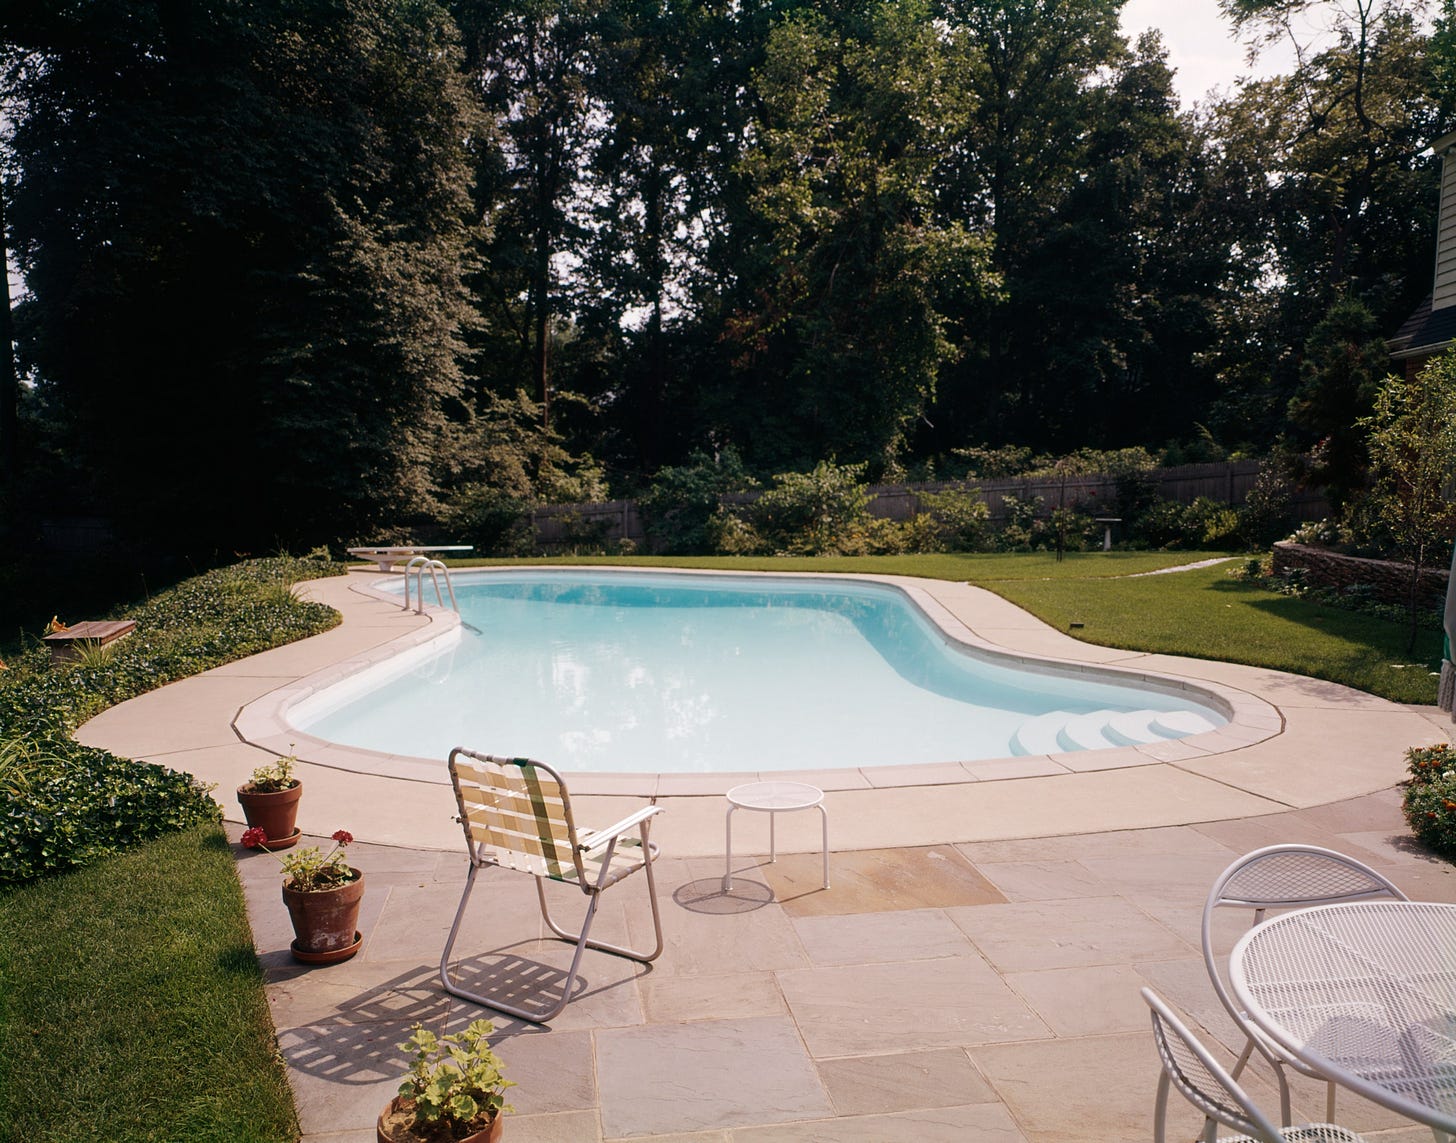 A midcentury kidneyshaped pool with a lawn chair next to it.